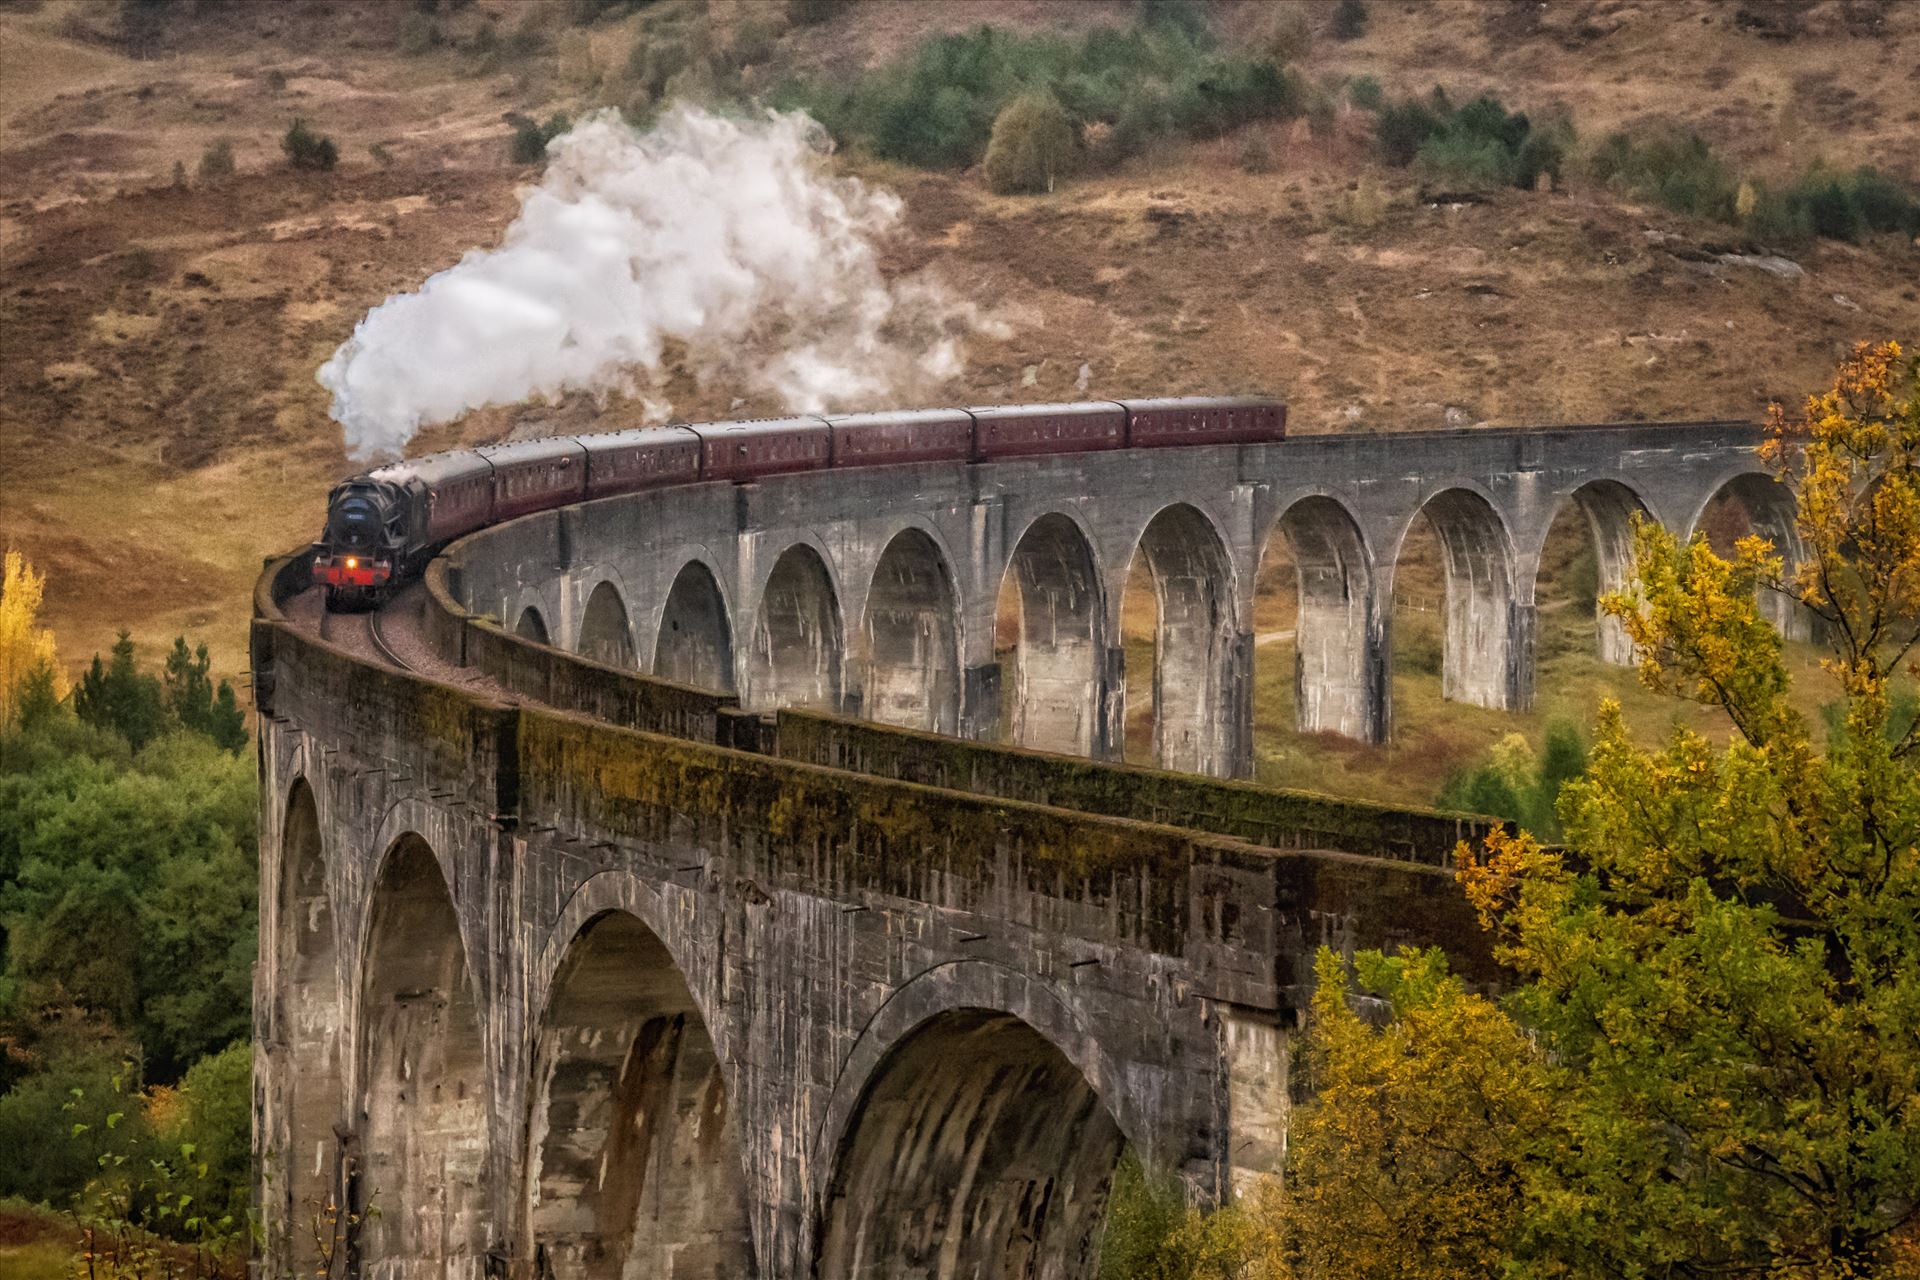 The Glenfinnan Viaduct (2) - The Glenfinnan viaduct is a railway viaduct on the West Highland line which connects Fort William and Malaig. The viaduct has been the location for many films and tv series but probably most famous for the Harry Potter films. by philreay